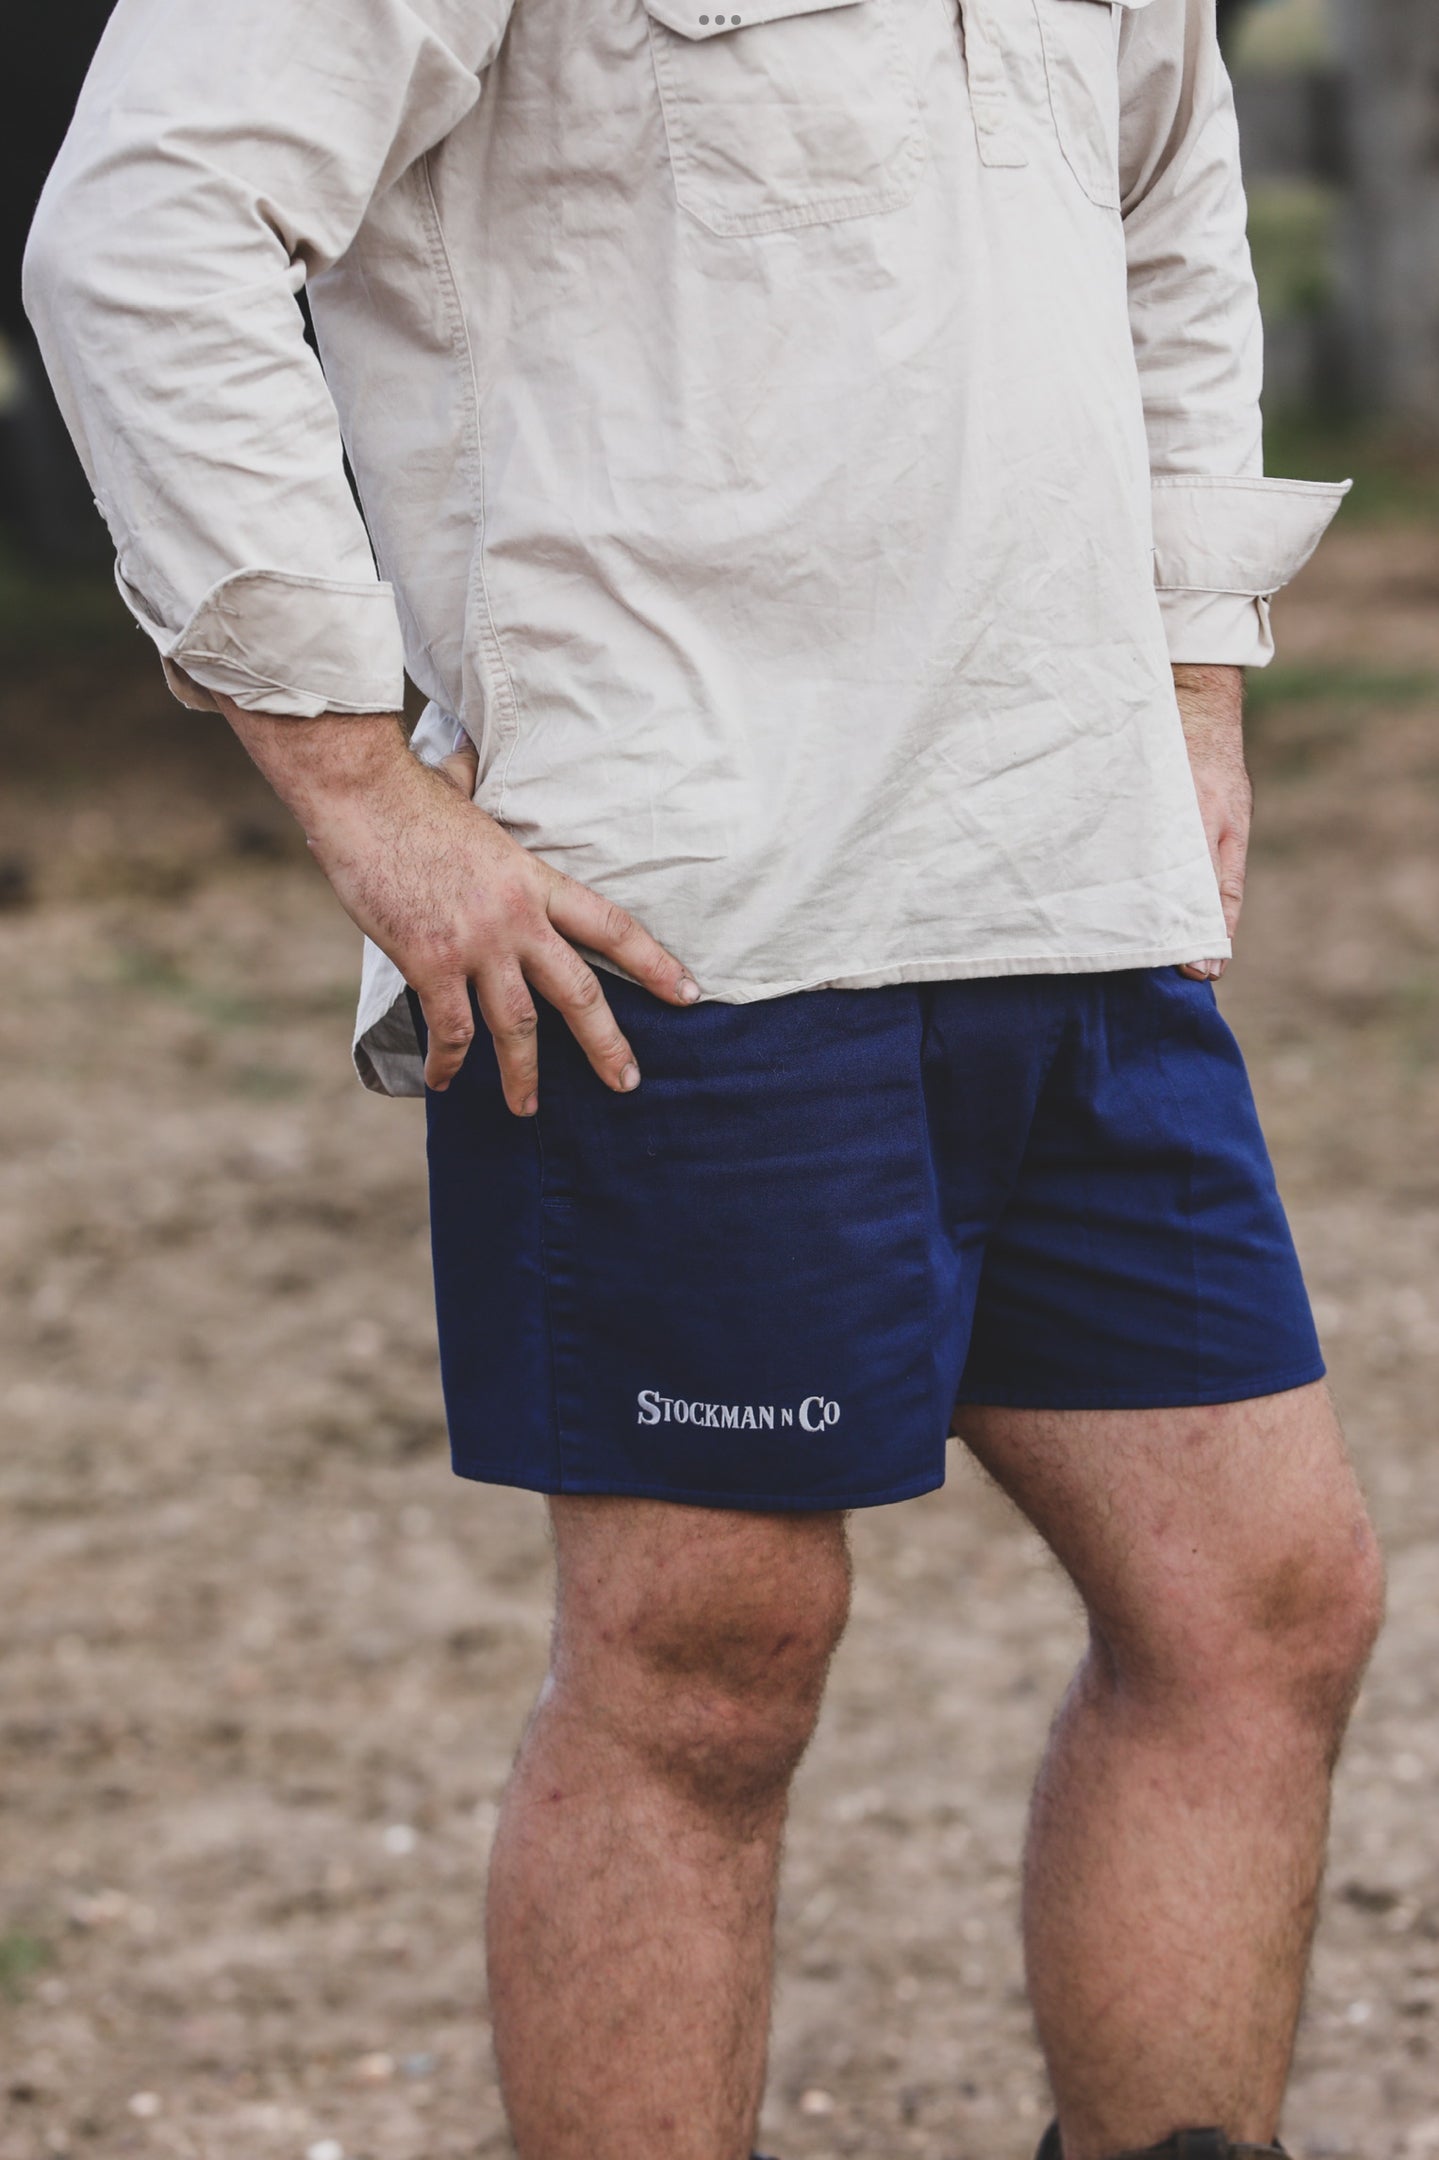 Men's Rugby shorts - STOCKMAN N CO